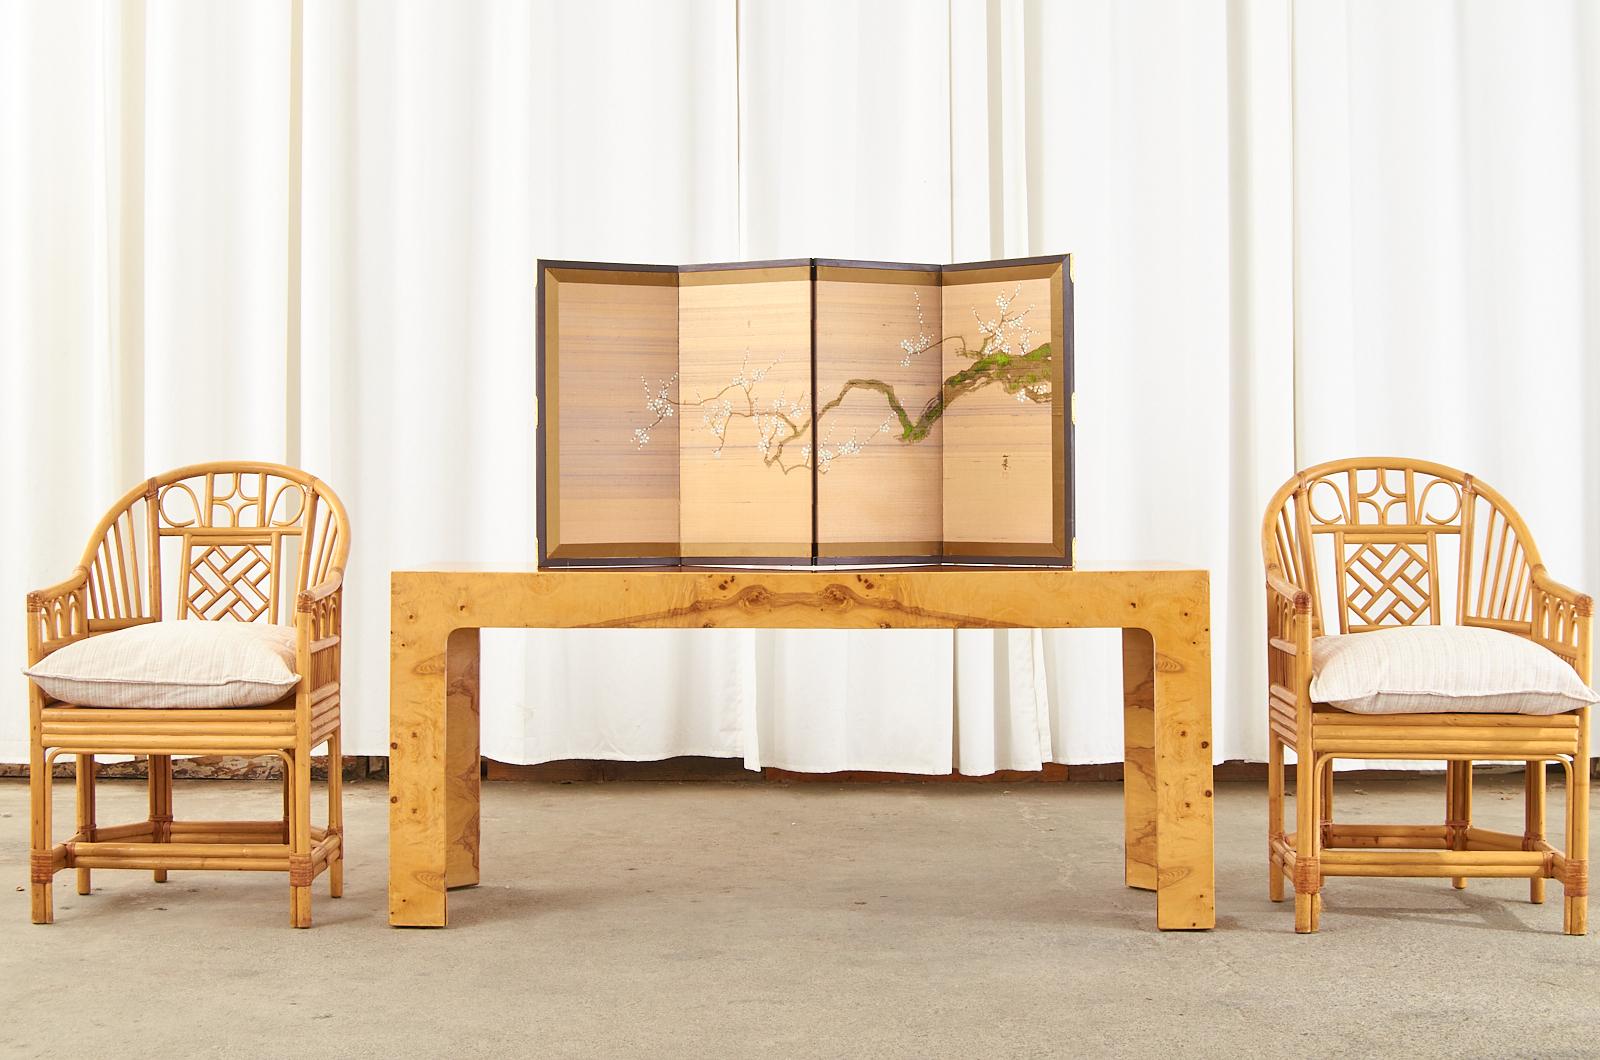 Diminutive Japanese Showa period four-panel folding byobu screen featuring a spring blossoming prunus tree. Ink and natural color pigments painted on silk with a gilt silk border. The painting is signed Ichiju/Kazutoshi on the right side with seal